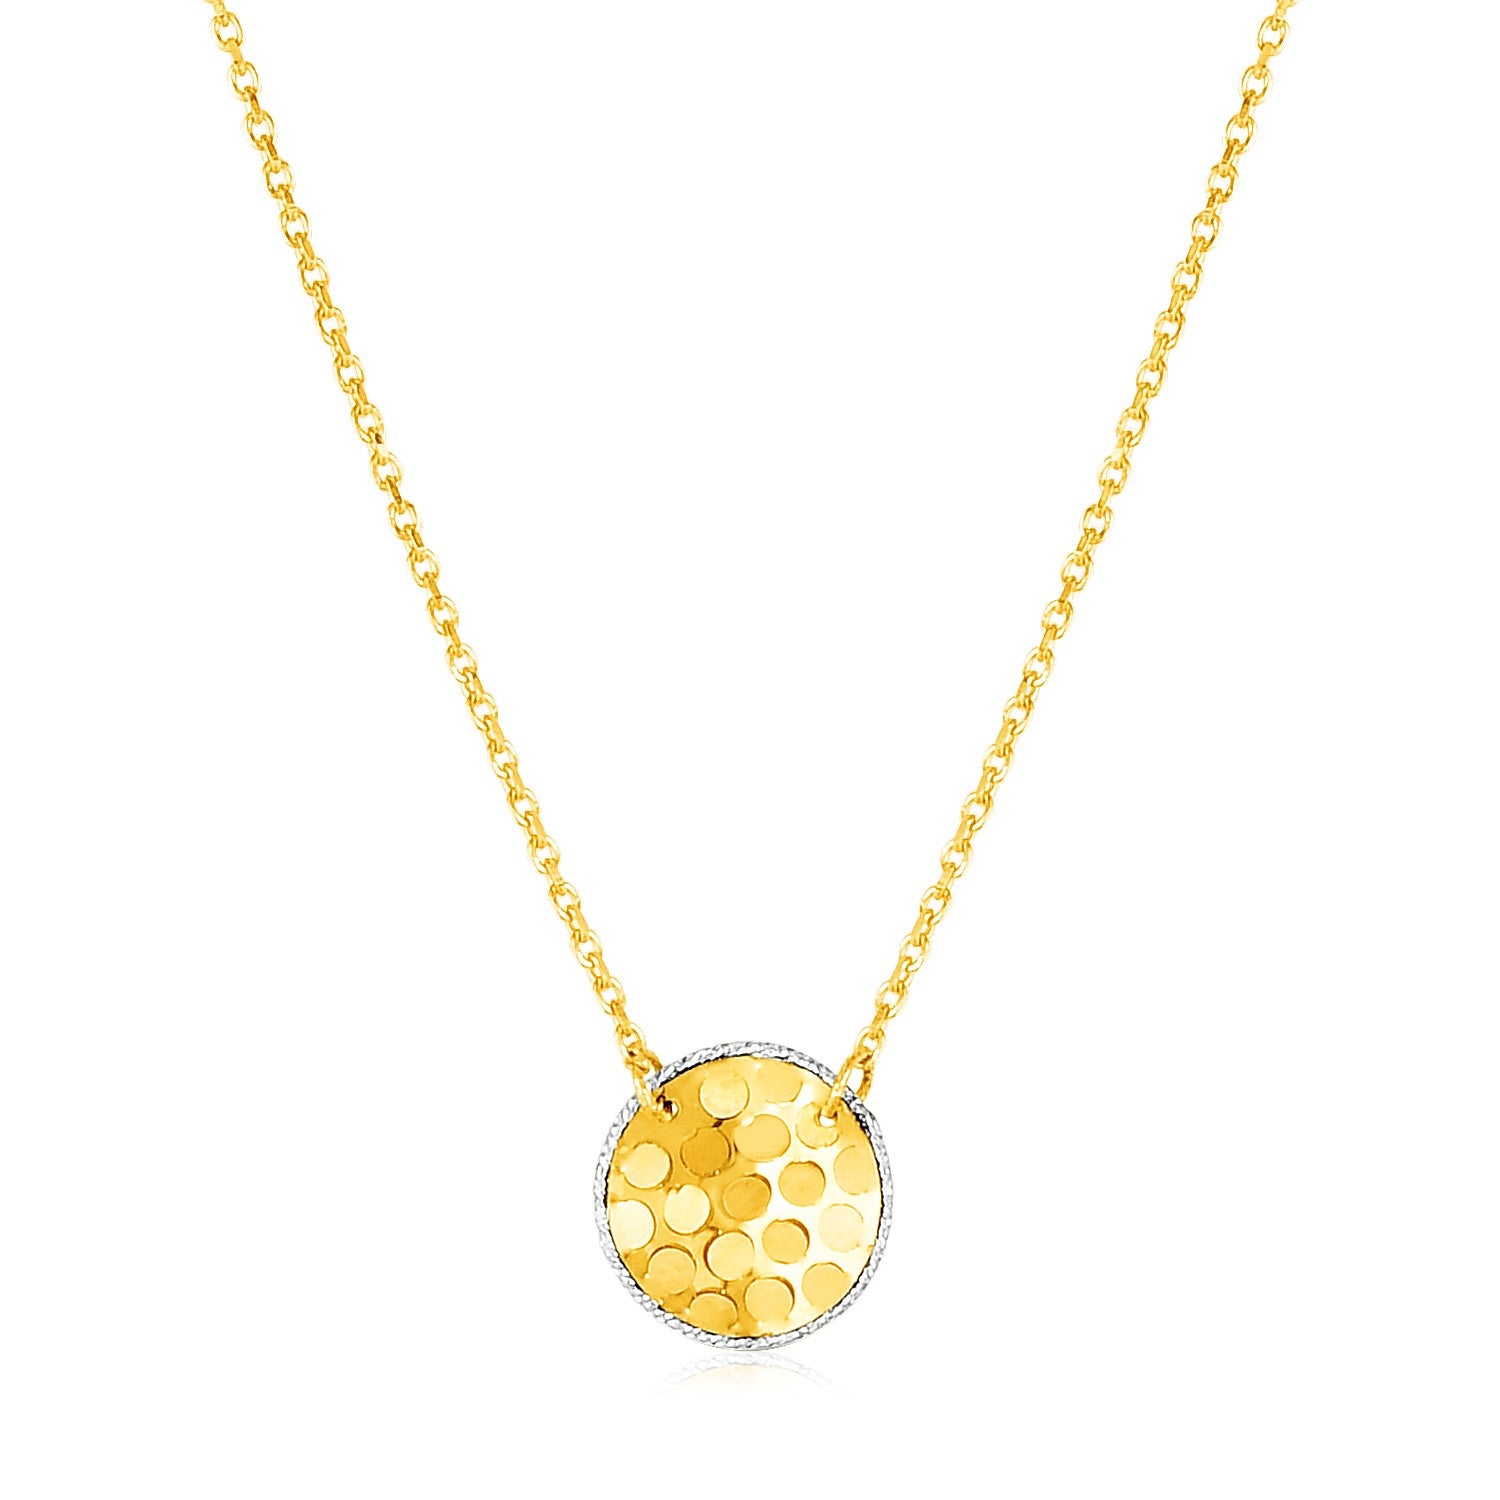 14k Yellow Gold Textured Circle Necklace with White Gold Details